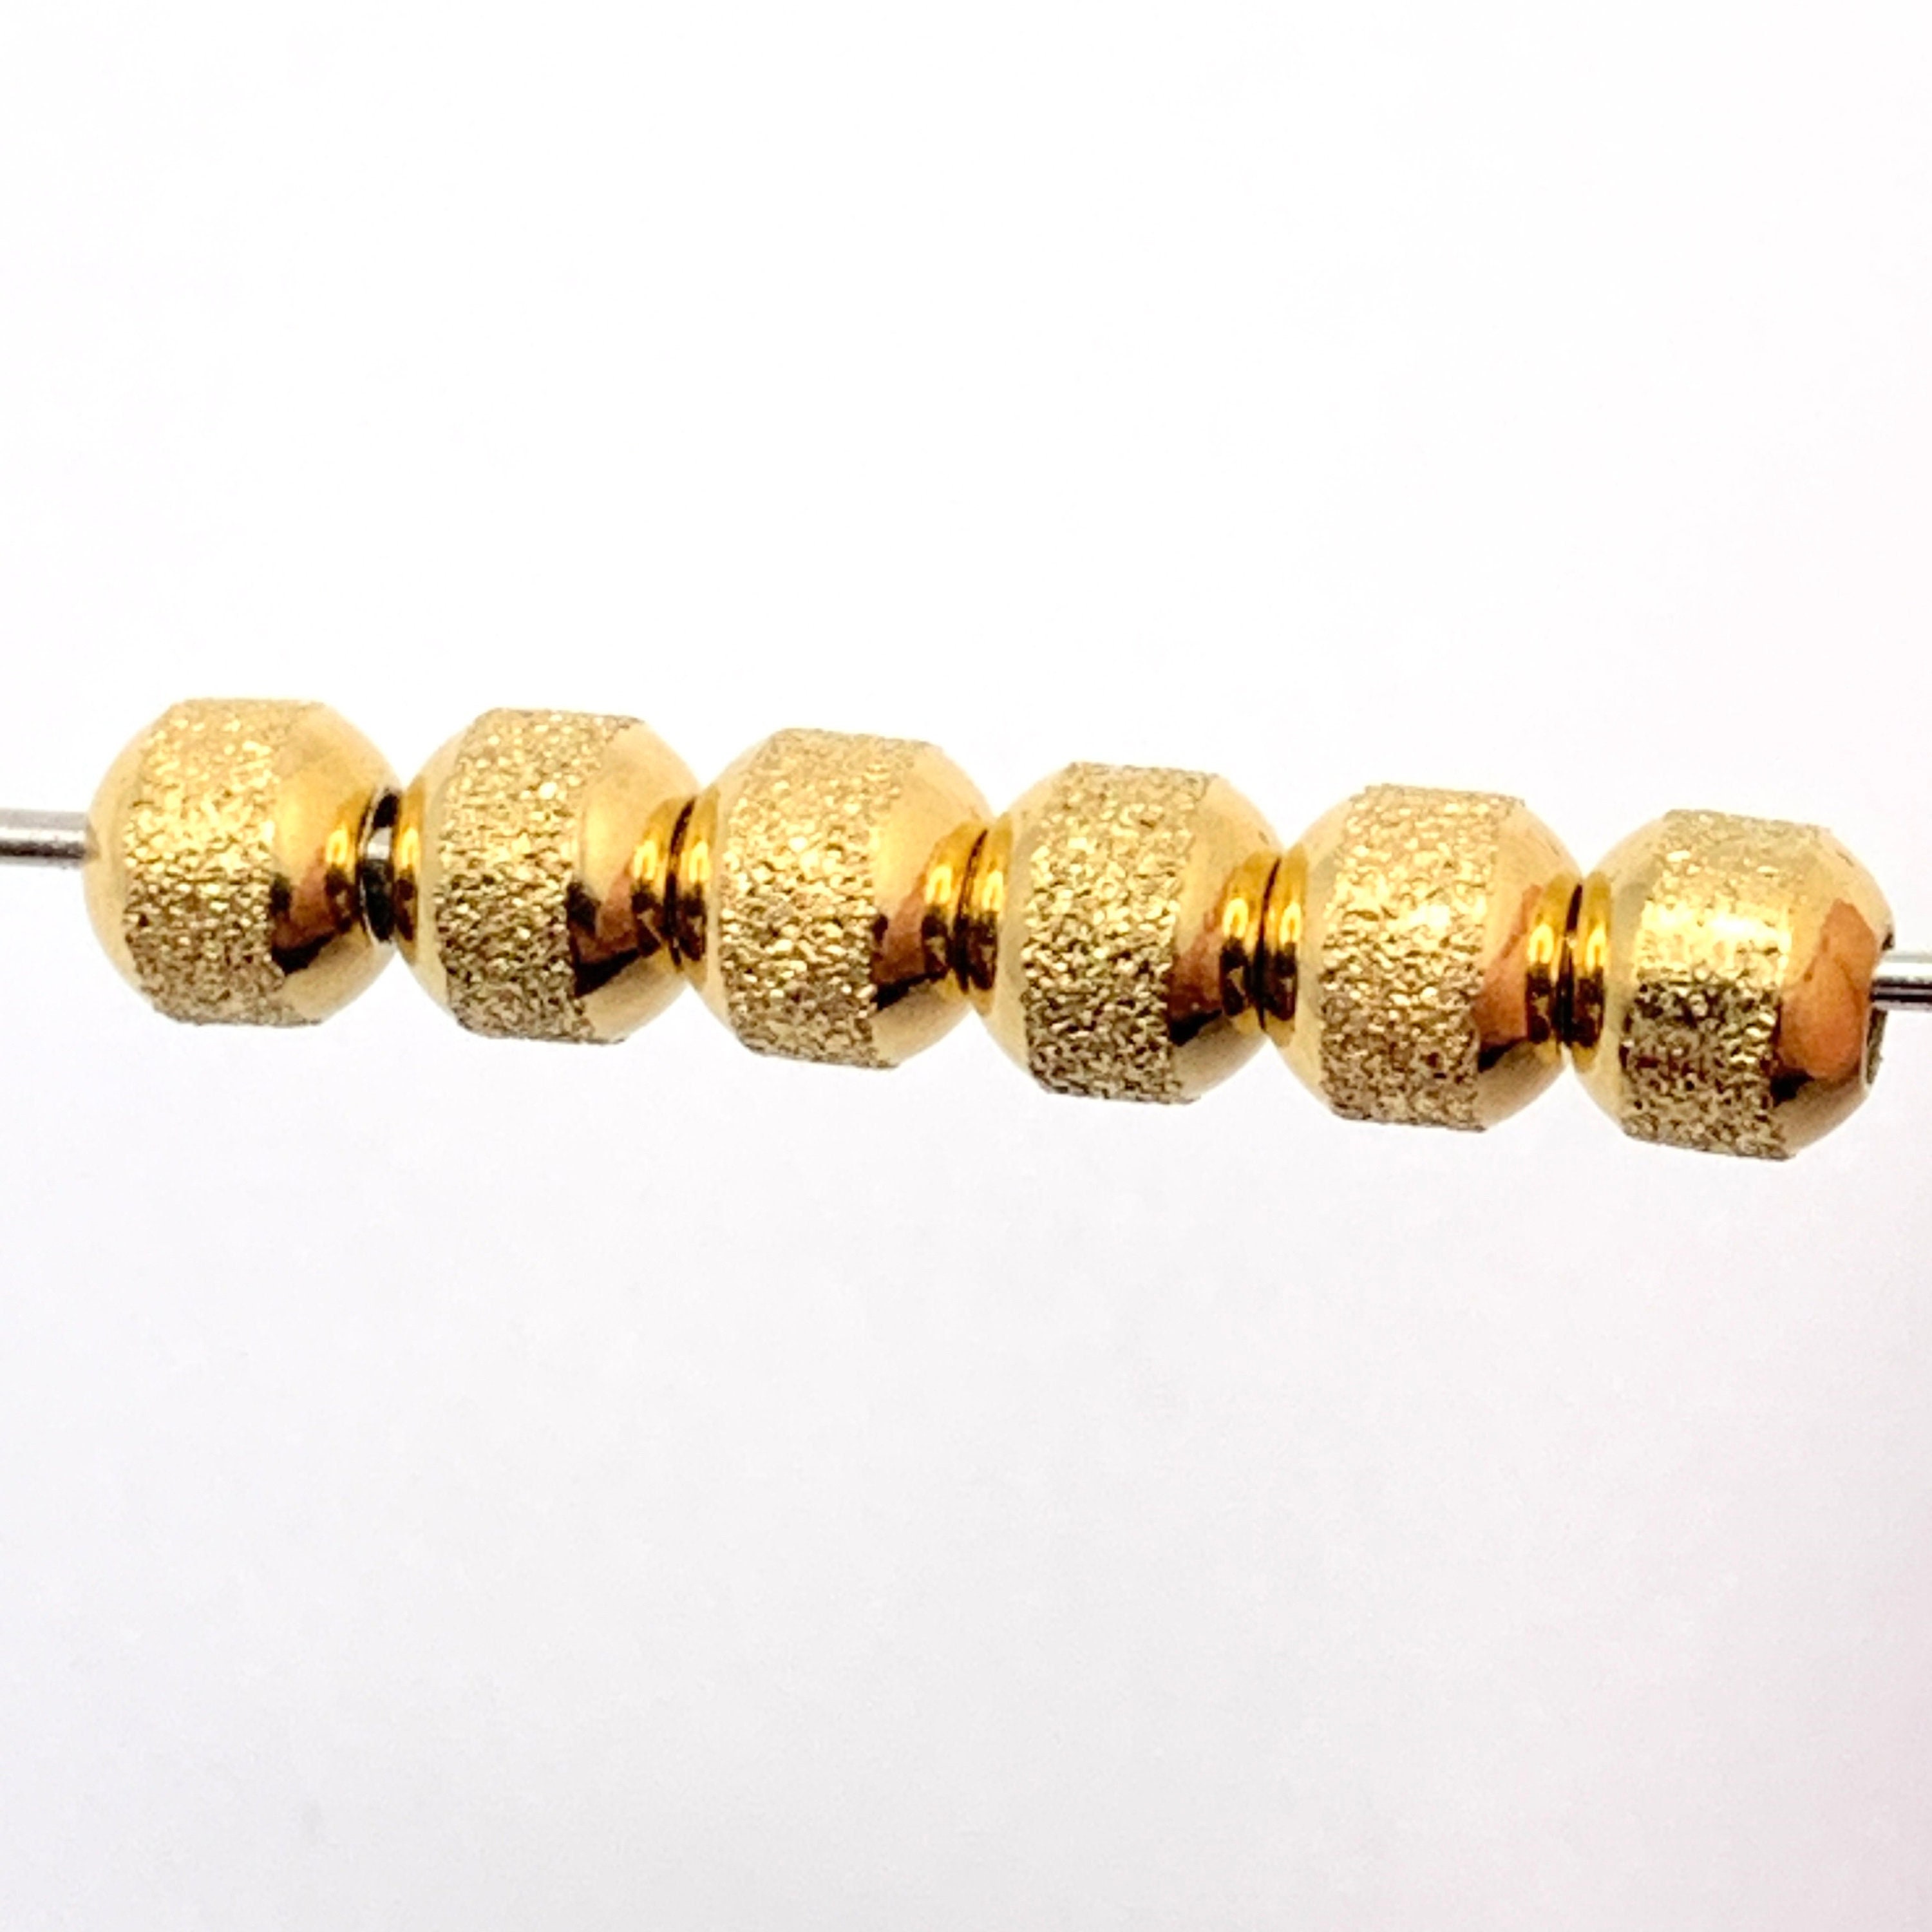 100 Gold Beads - 4mm Gold Ball Beads - Gold Plated Round Beads - Spacer  Beads - Gold Metal Beads (FS92)